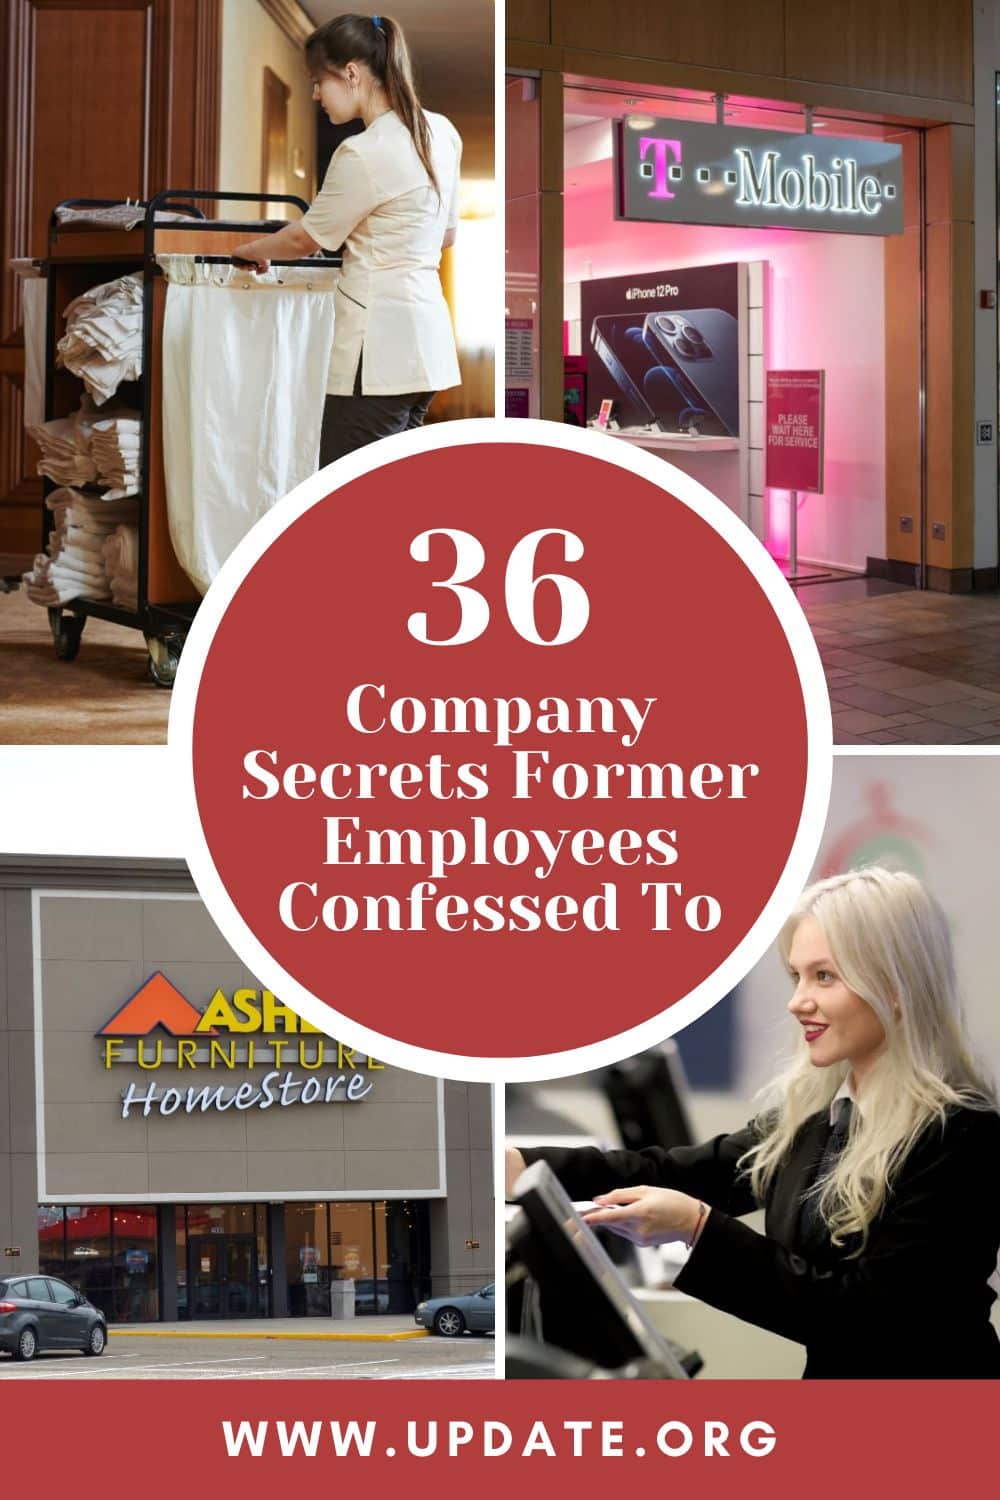 36 Company Secrets Former Employees Confessed To pinterest image.